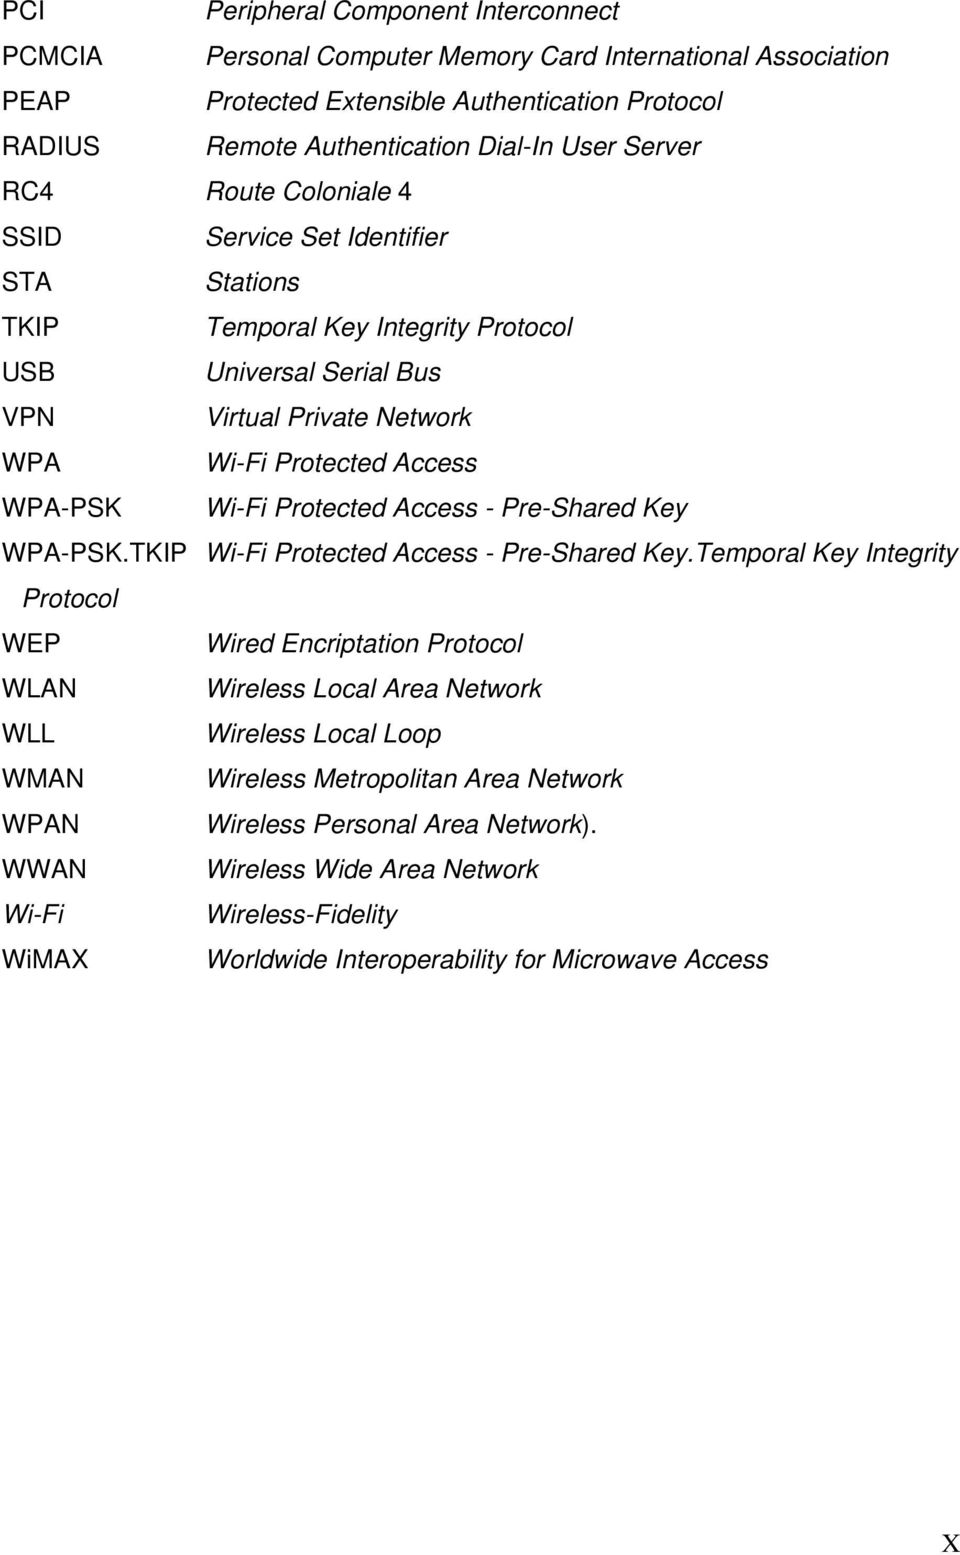 Wi-Fi Protected Access - Pre-Shared Key WPA-PSK.TKIP Wi-Fi Protected Access - Pre-Shared Key.